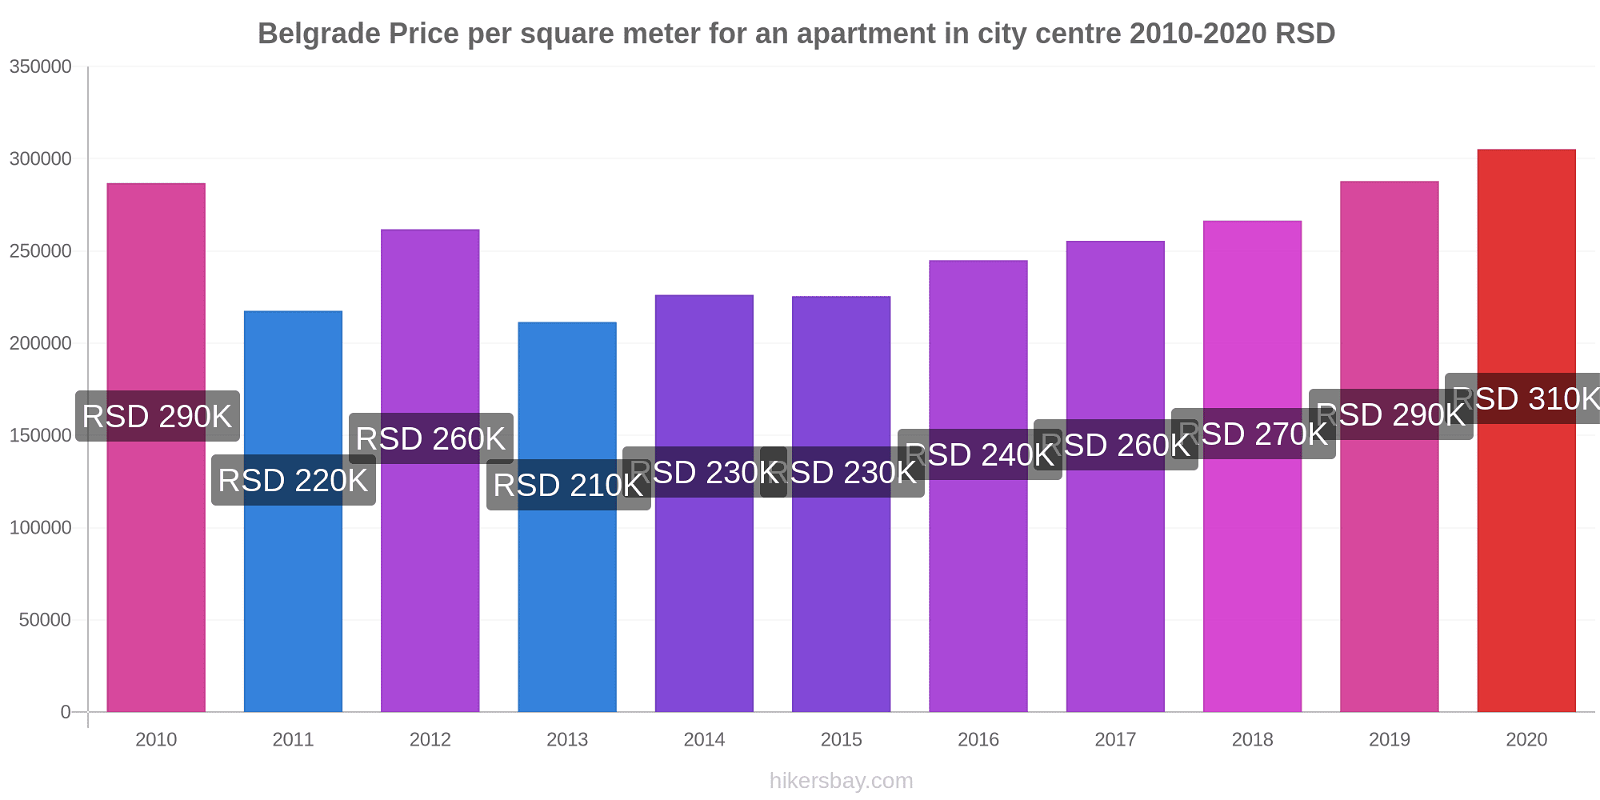 Belgrade price changes Price per square meter for an apartment in city centre hikersbay.com